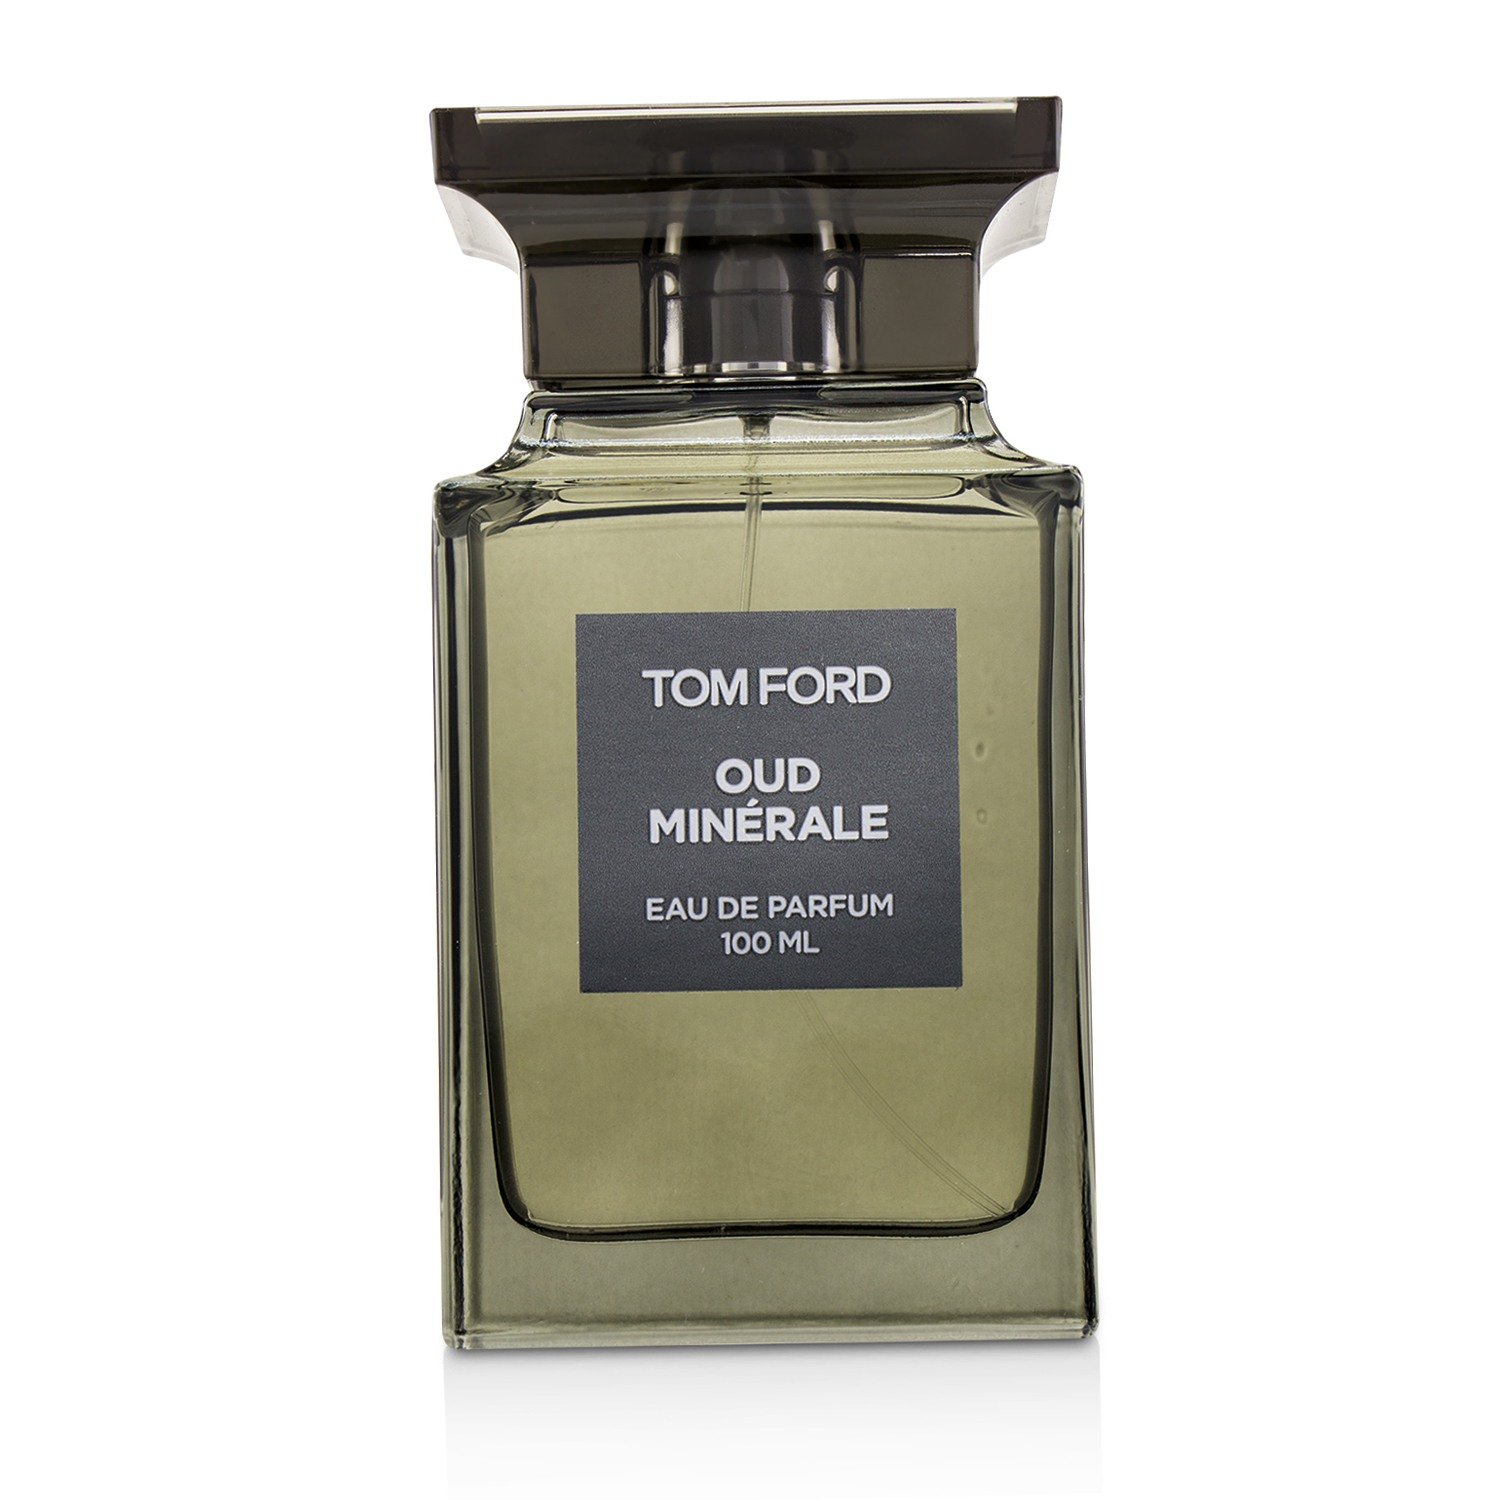 Top 91+ imagen tom ford oud minerale sample - Abzlocal.mx